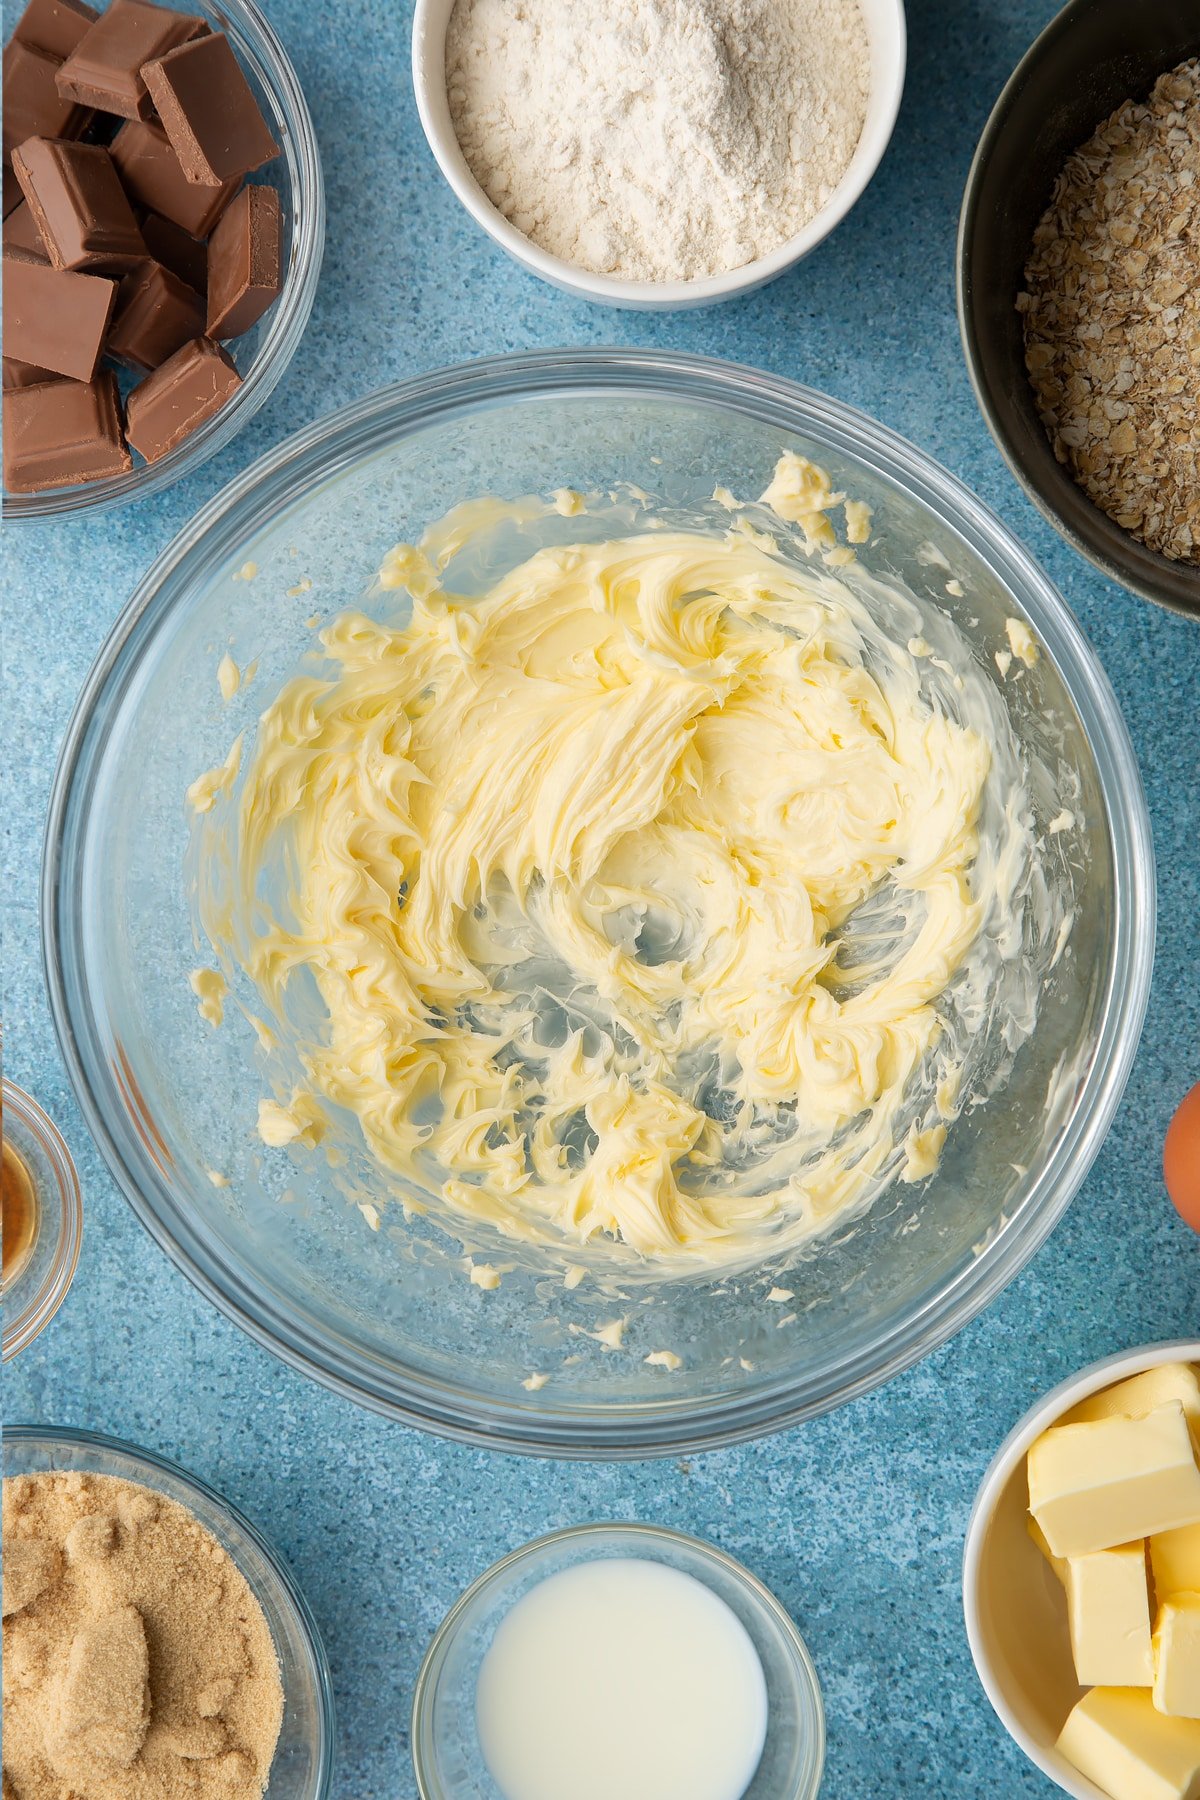 Whipped butter in a glass mixing bowl. Ingredients to make cookie monster cookies surround the bowl.